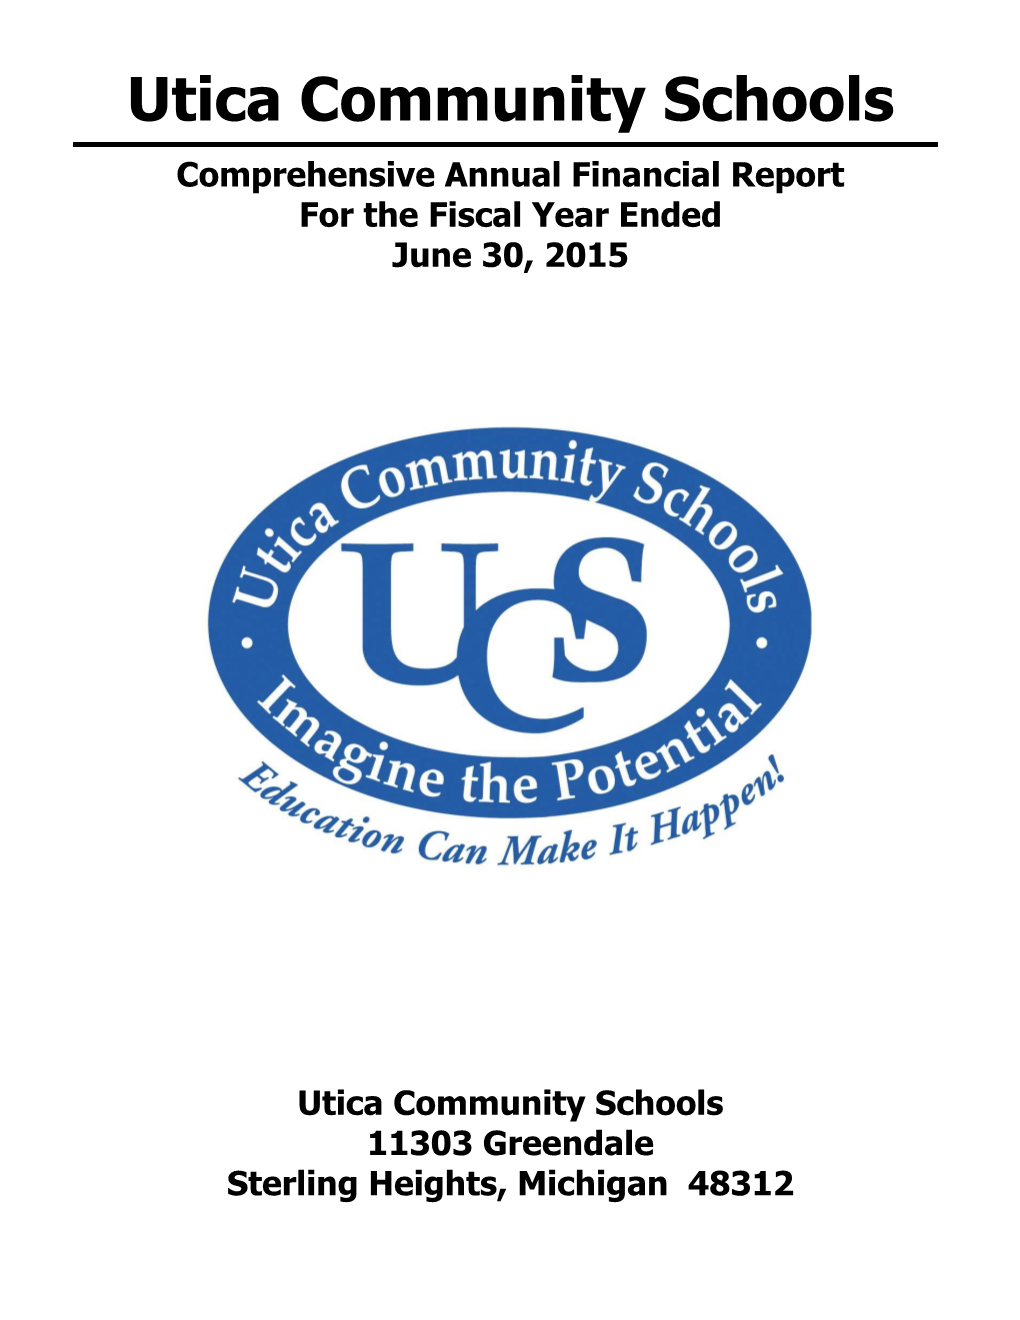 Comprehensive Annual Financial Report for the Fiscal Year Ended June 30, 2015